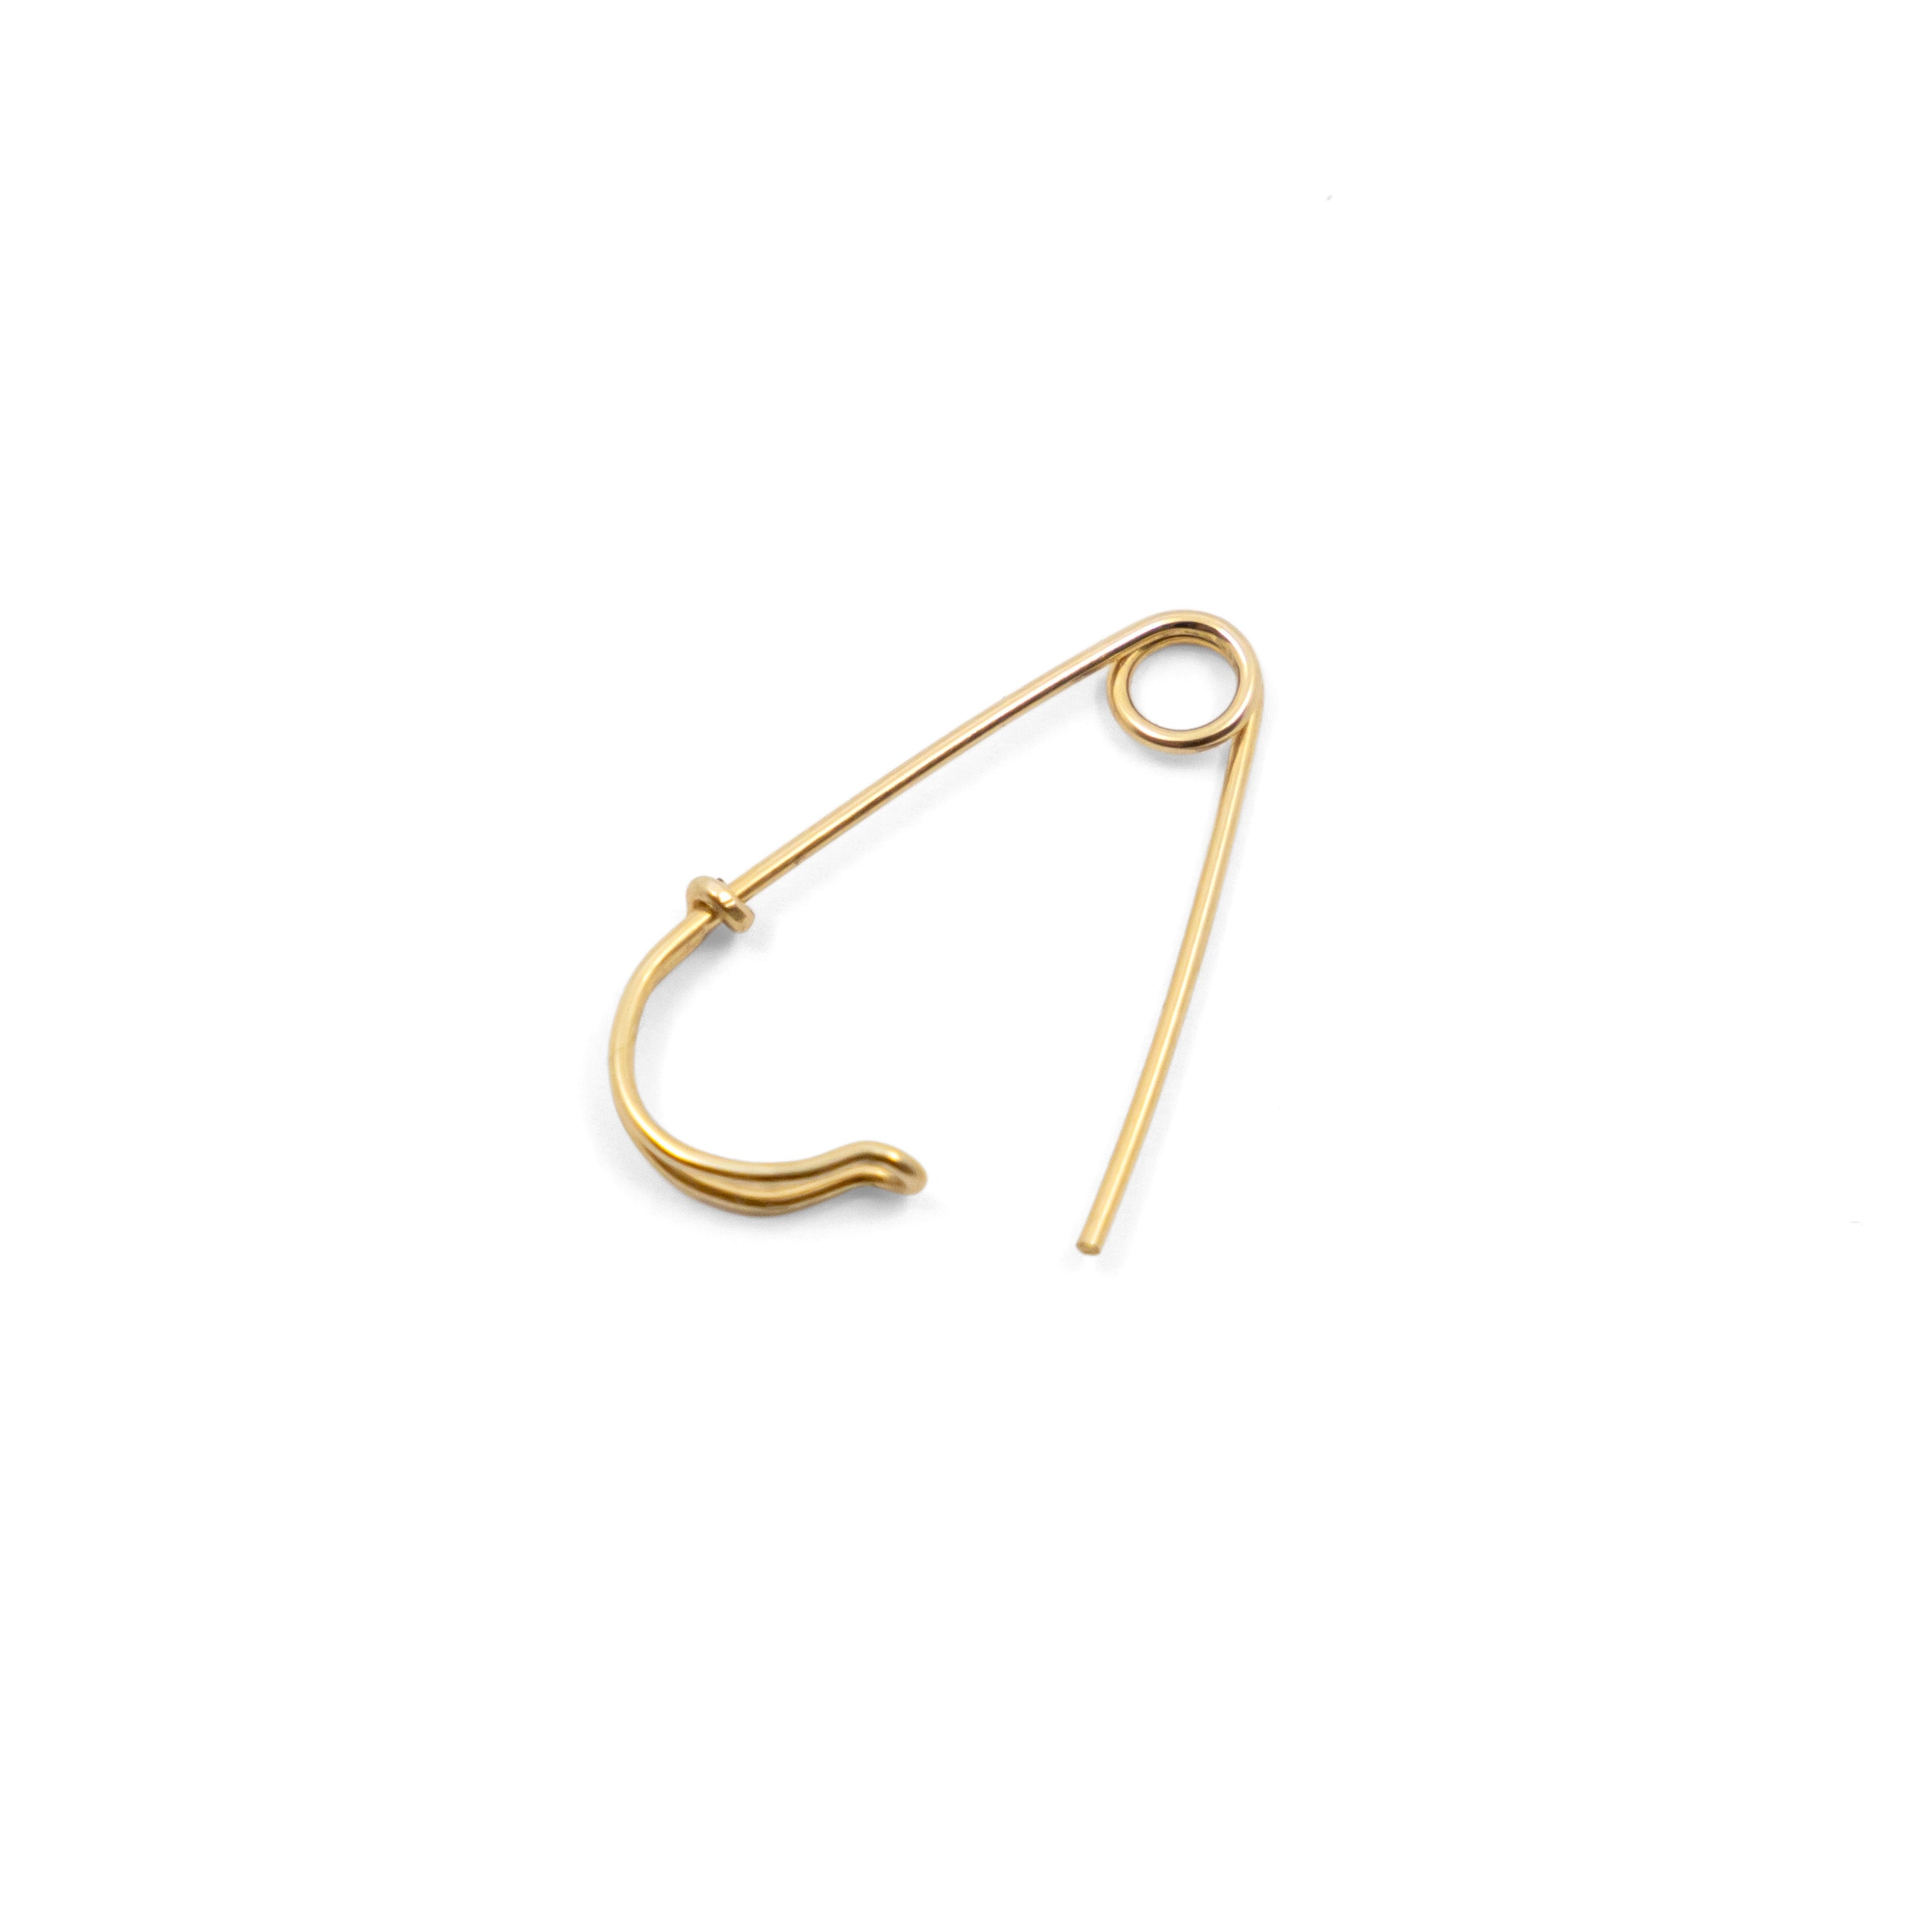 Safety pin gold - Gold earrings - Trium Jewelry